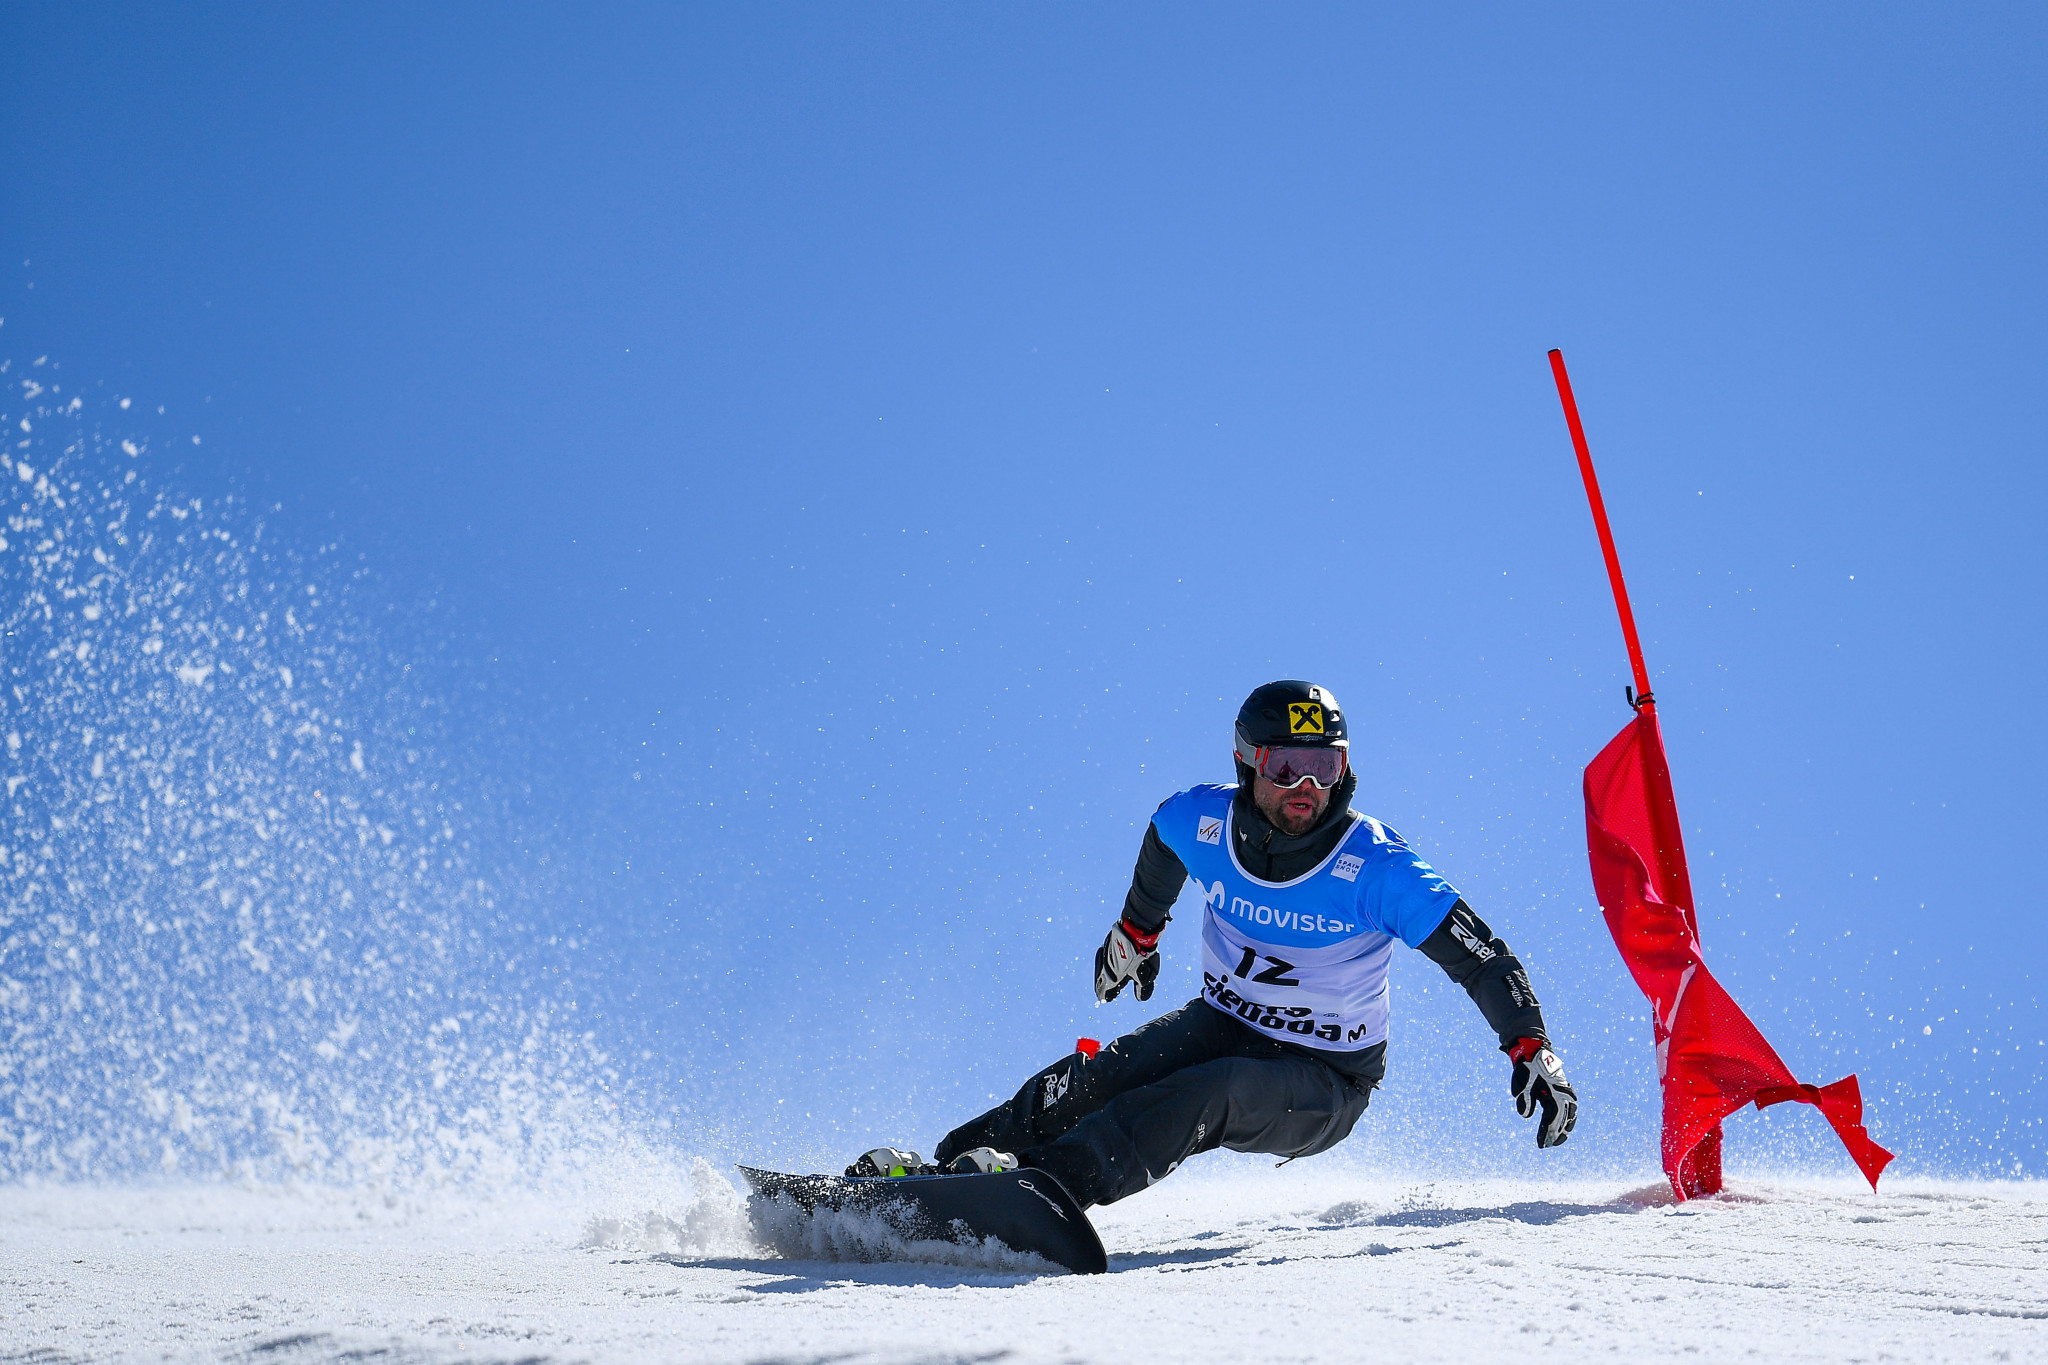 Prommegger on top at FIS Alpine Snowboard World Cup in Piancavallo